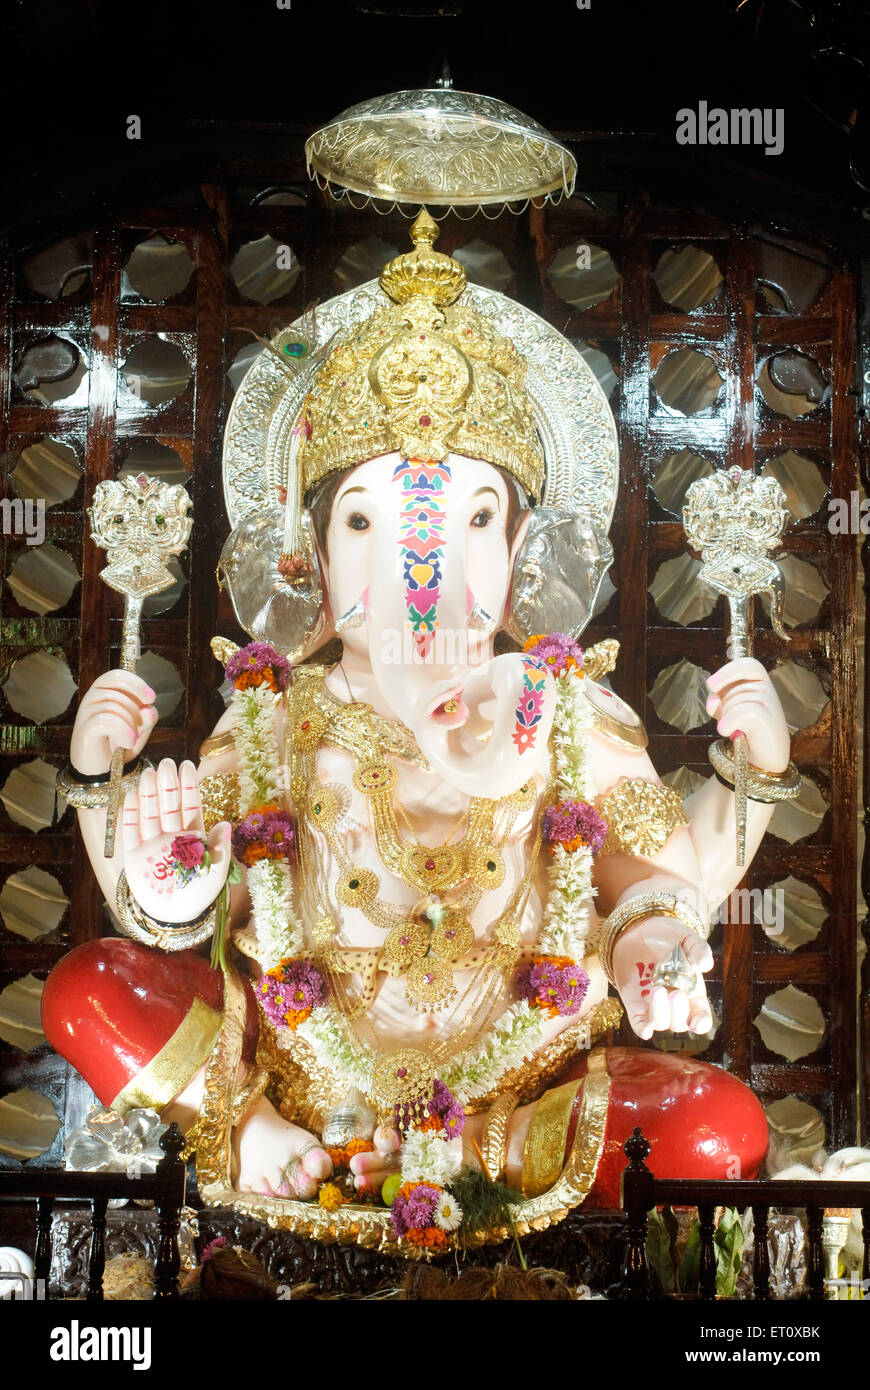 Richly decorated idol of Lord Ganesh kept in gaily decorated frame elephant headed god ; Ganapati festival year 2008 at Pune Stock Photo